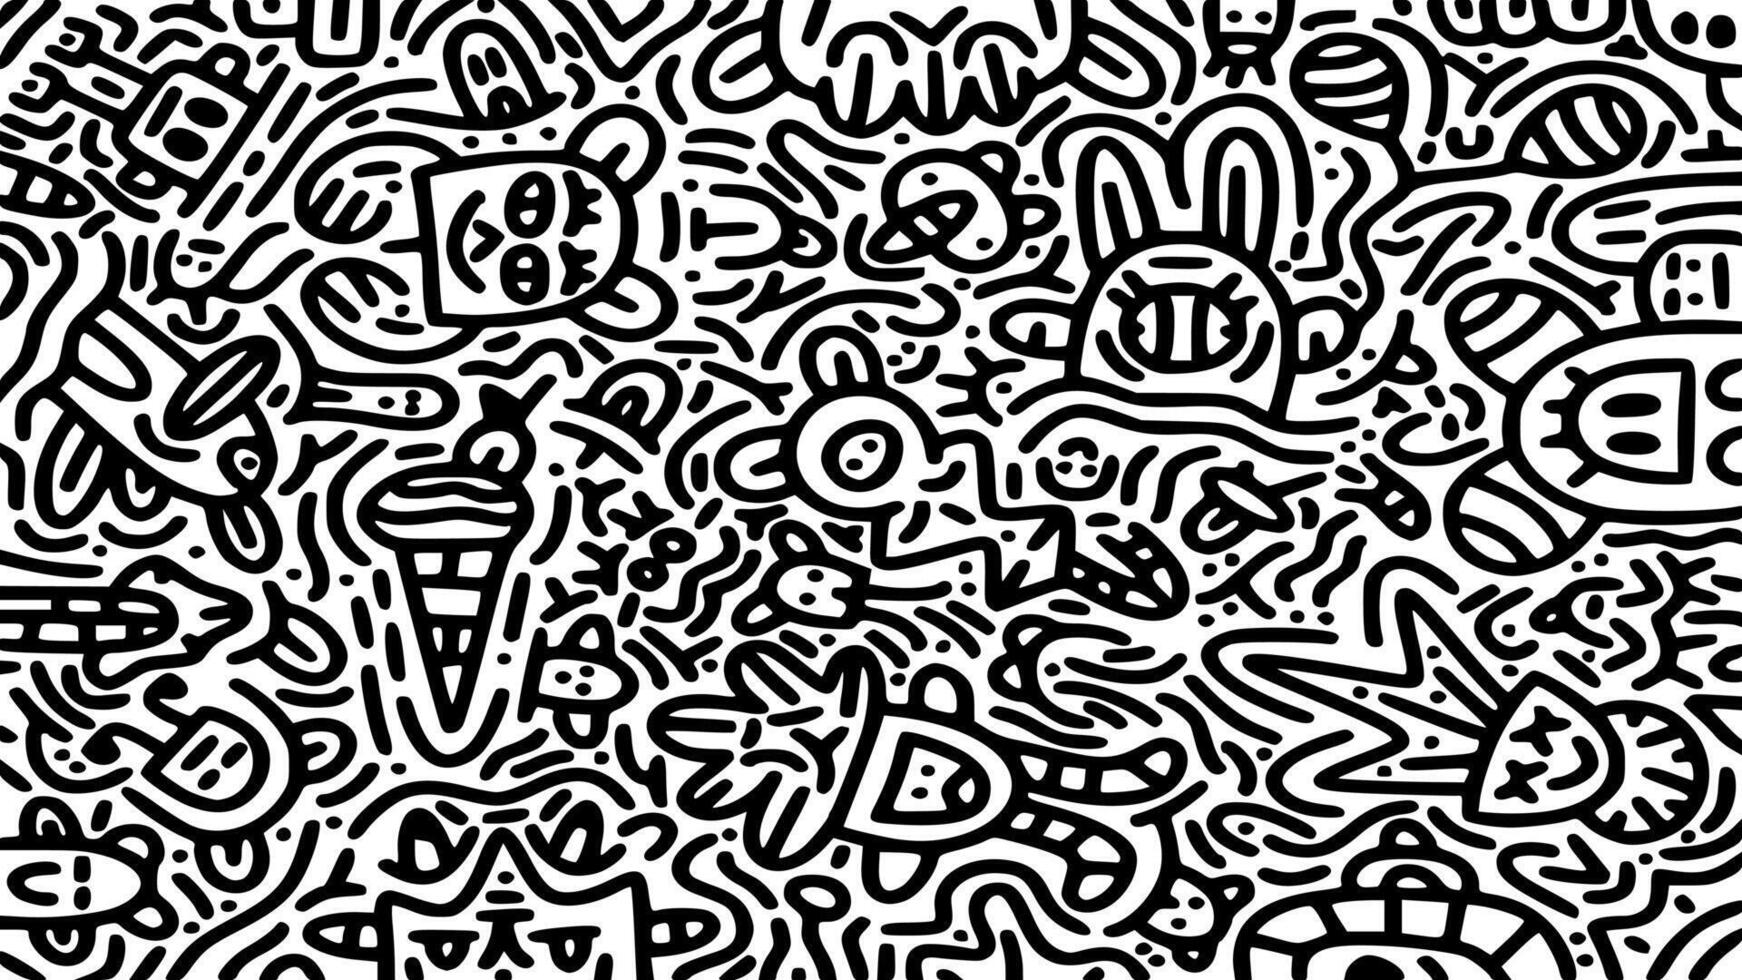 Cute hand drawn doodle art with black lines filling the paper. Creative abstract vector illustration suitable for wallpaper, drawing books, covers. Isolated on white background